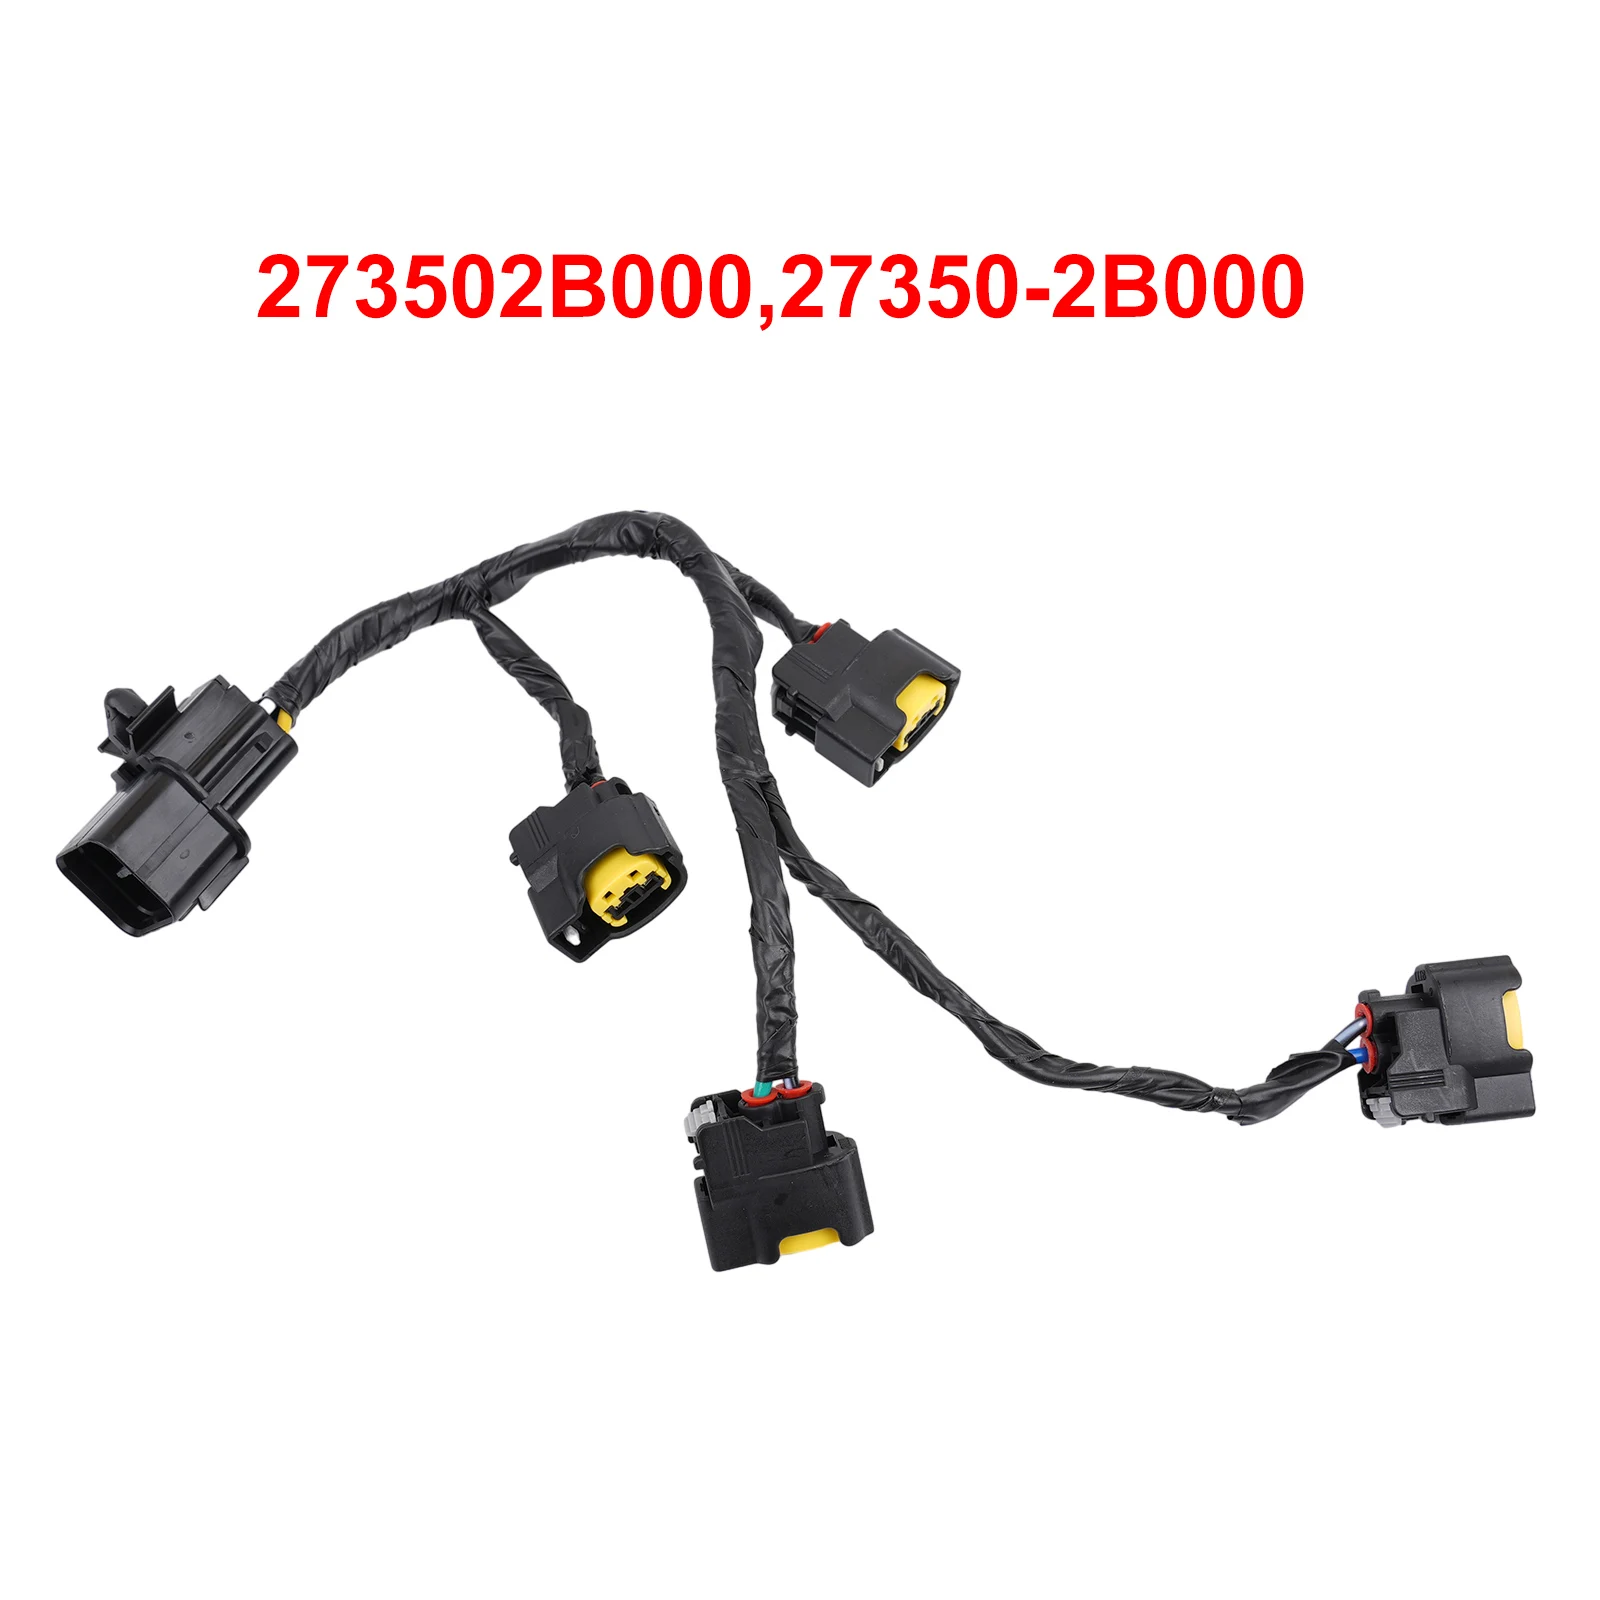 

Ignition Coil Wire Harness Plug 273502B000 For Kia Rio Soul Feature: According To The Factory Specifications. Perfect Match For